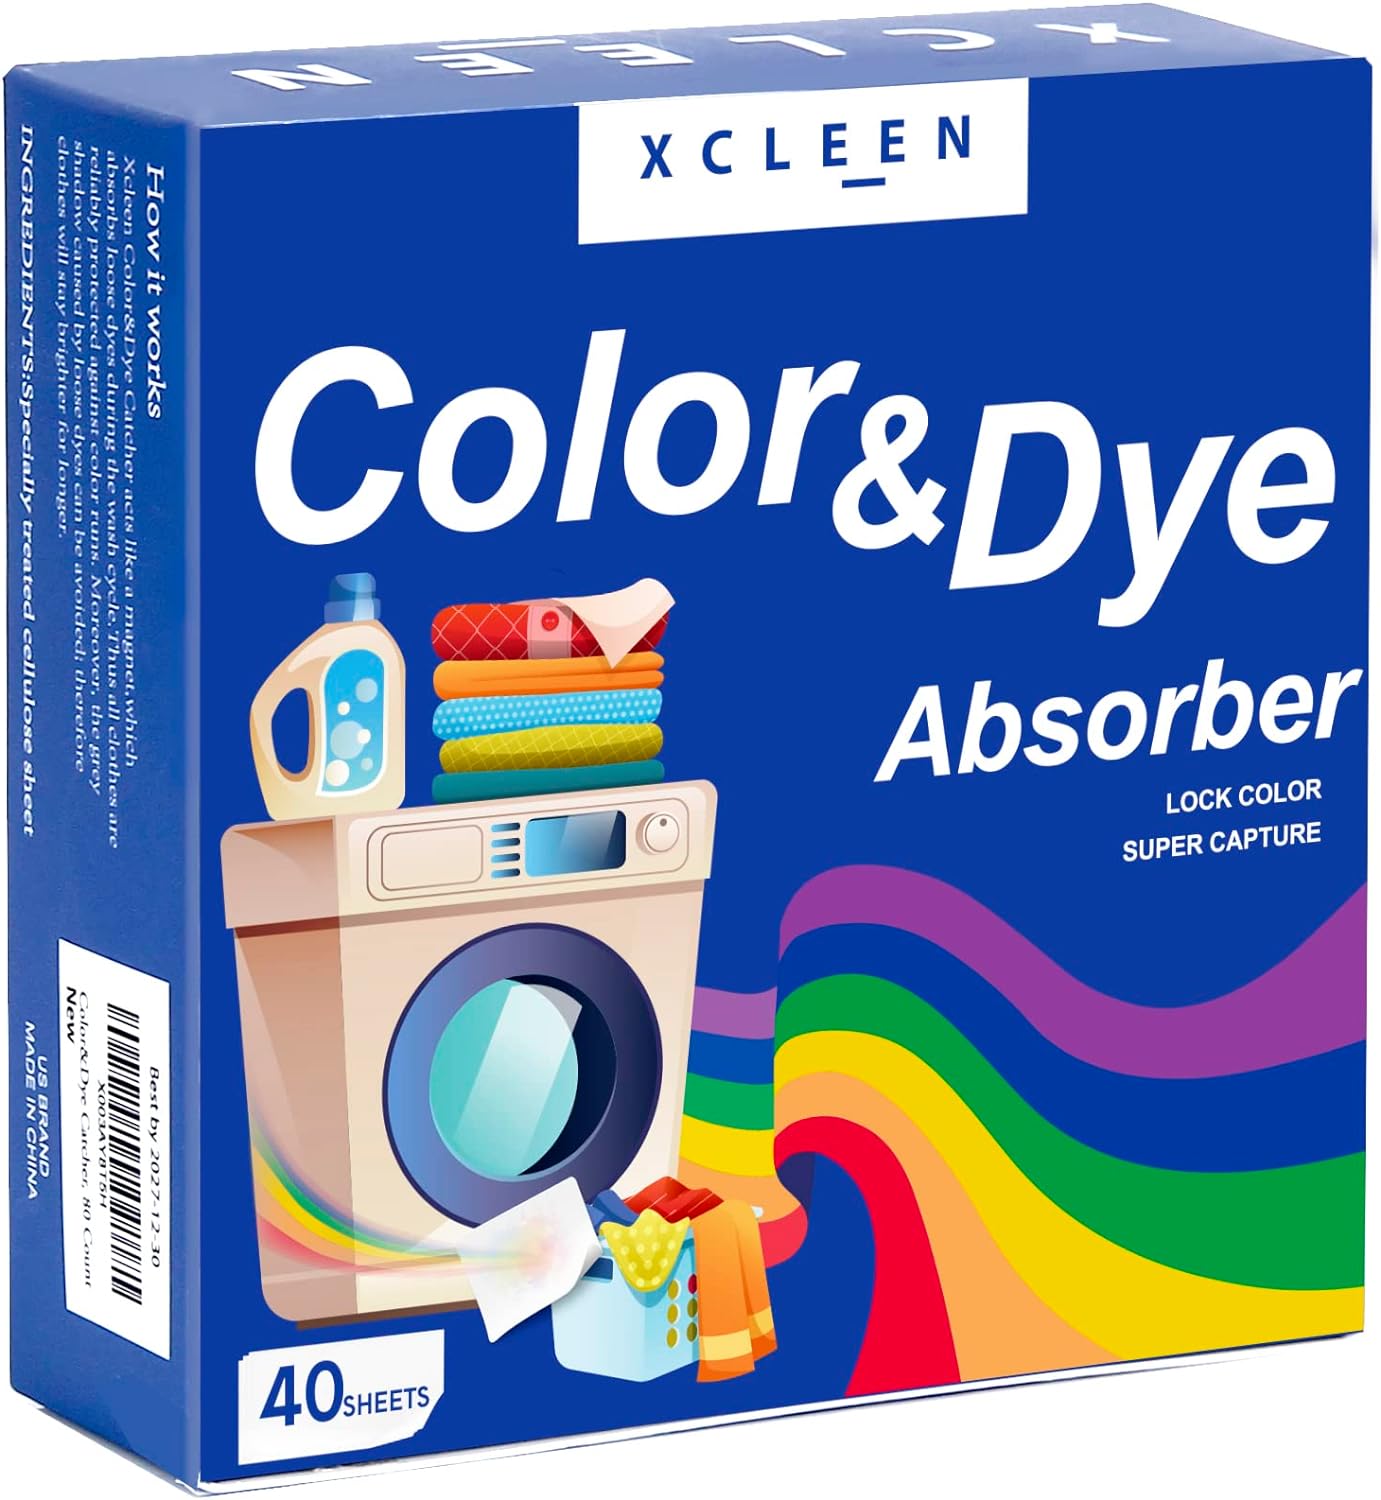 Color Absorber for Laundry-Protect Your Clothes from Color Bleed and Stains-40 Count